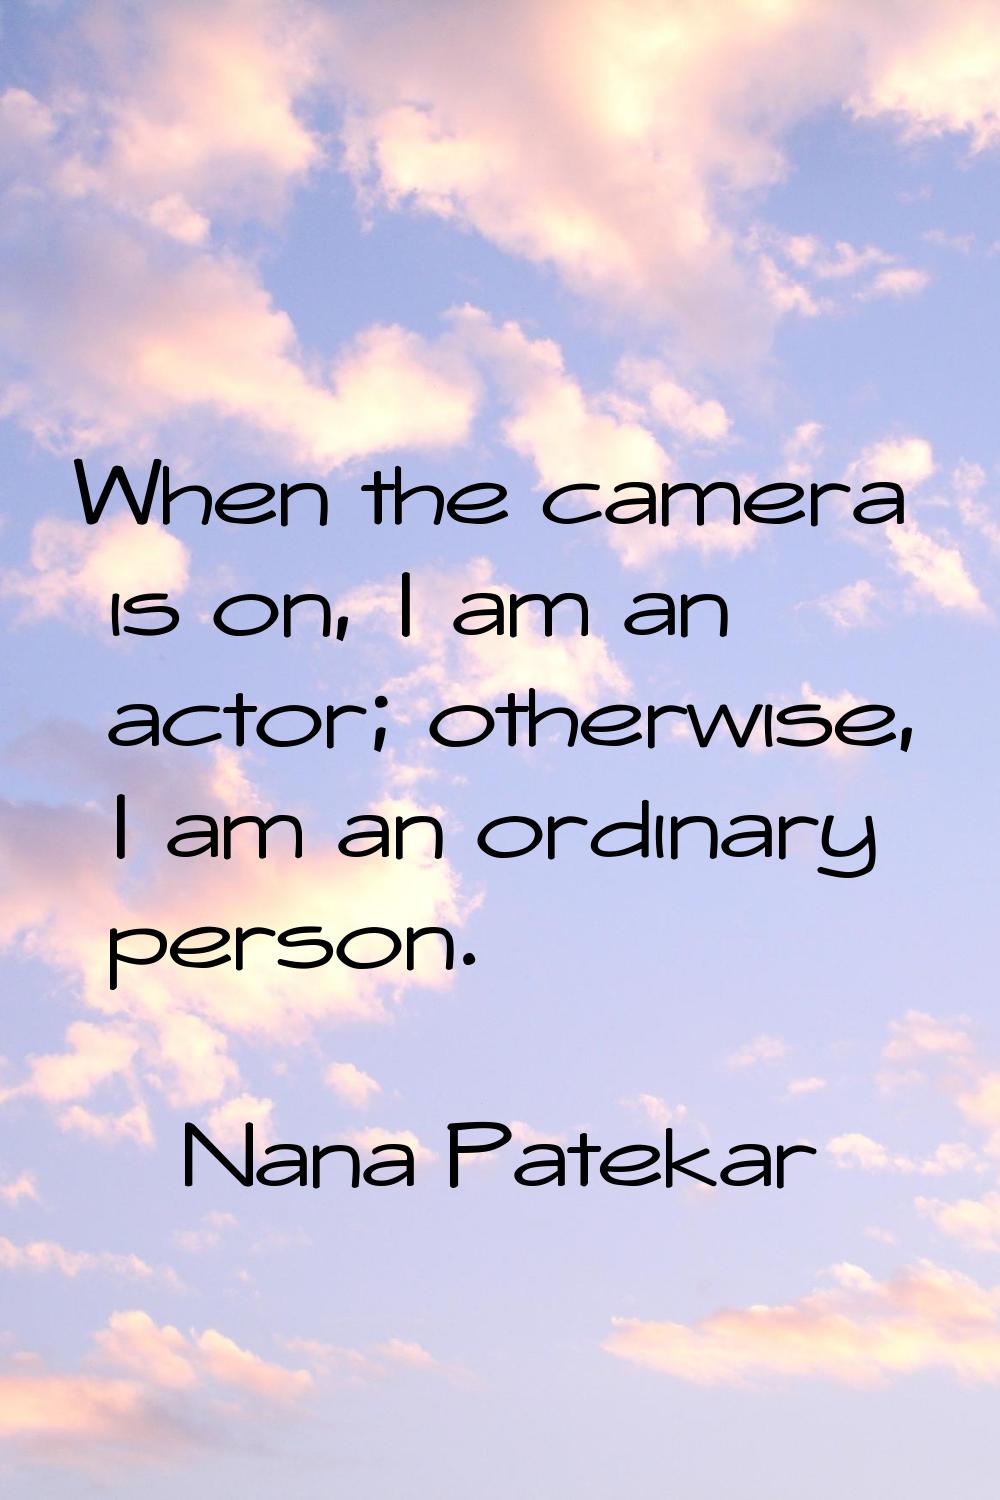 When the camera is on, I am an actor; otherwise, I am an ordinary person.